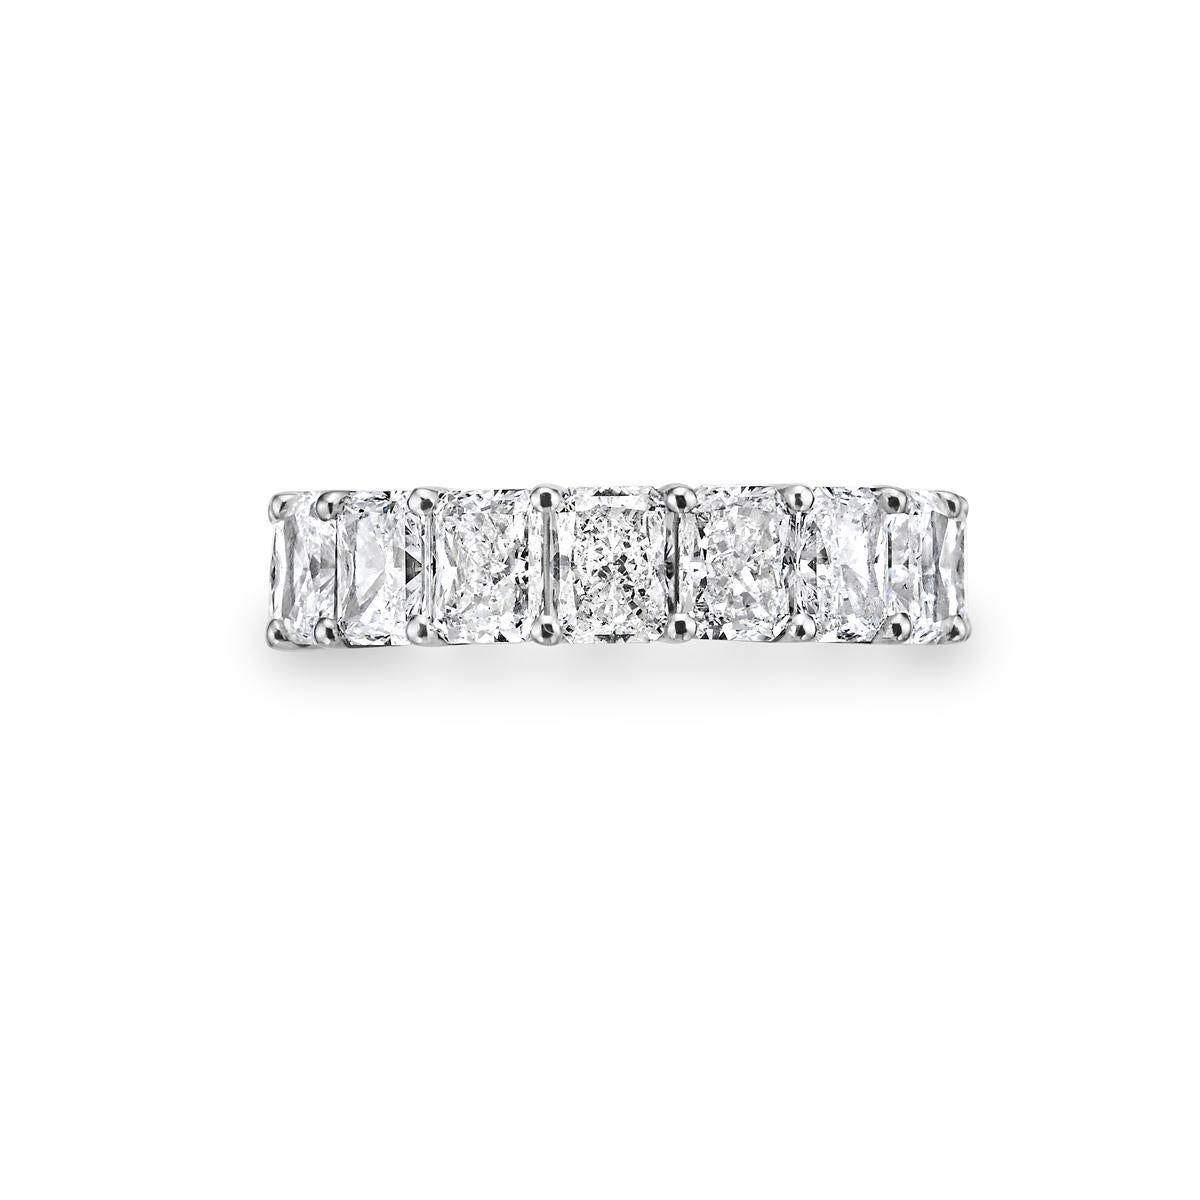 Made with 17 natural diamonds. Long Radiants approximately 0.50ct. each all GIA certified 
D-E-F Colors, VS1-VS2-SI1 clarities. (List available upon request) without visible inclusions.
Made in USA with the best quality. Platinum
Size 6.5